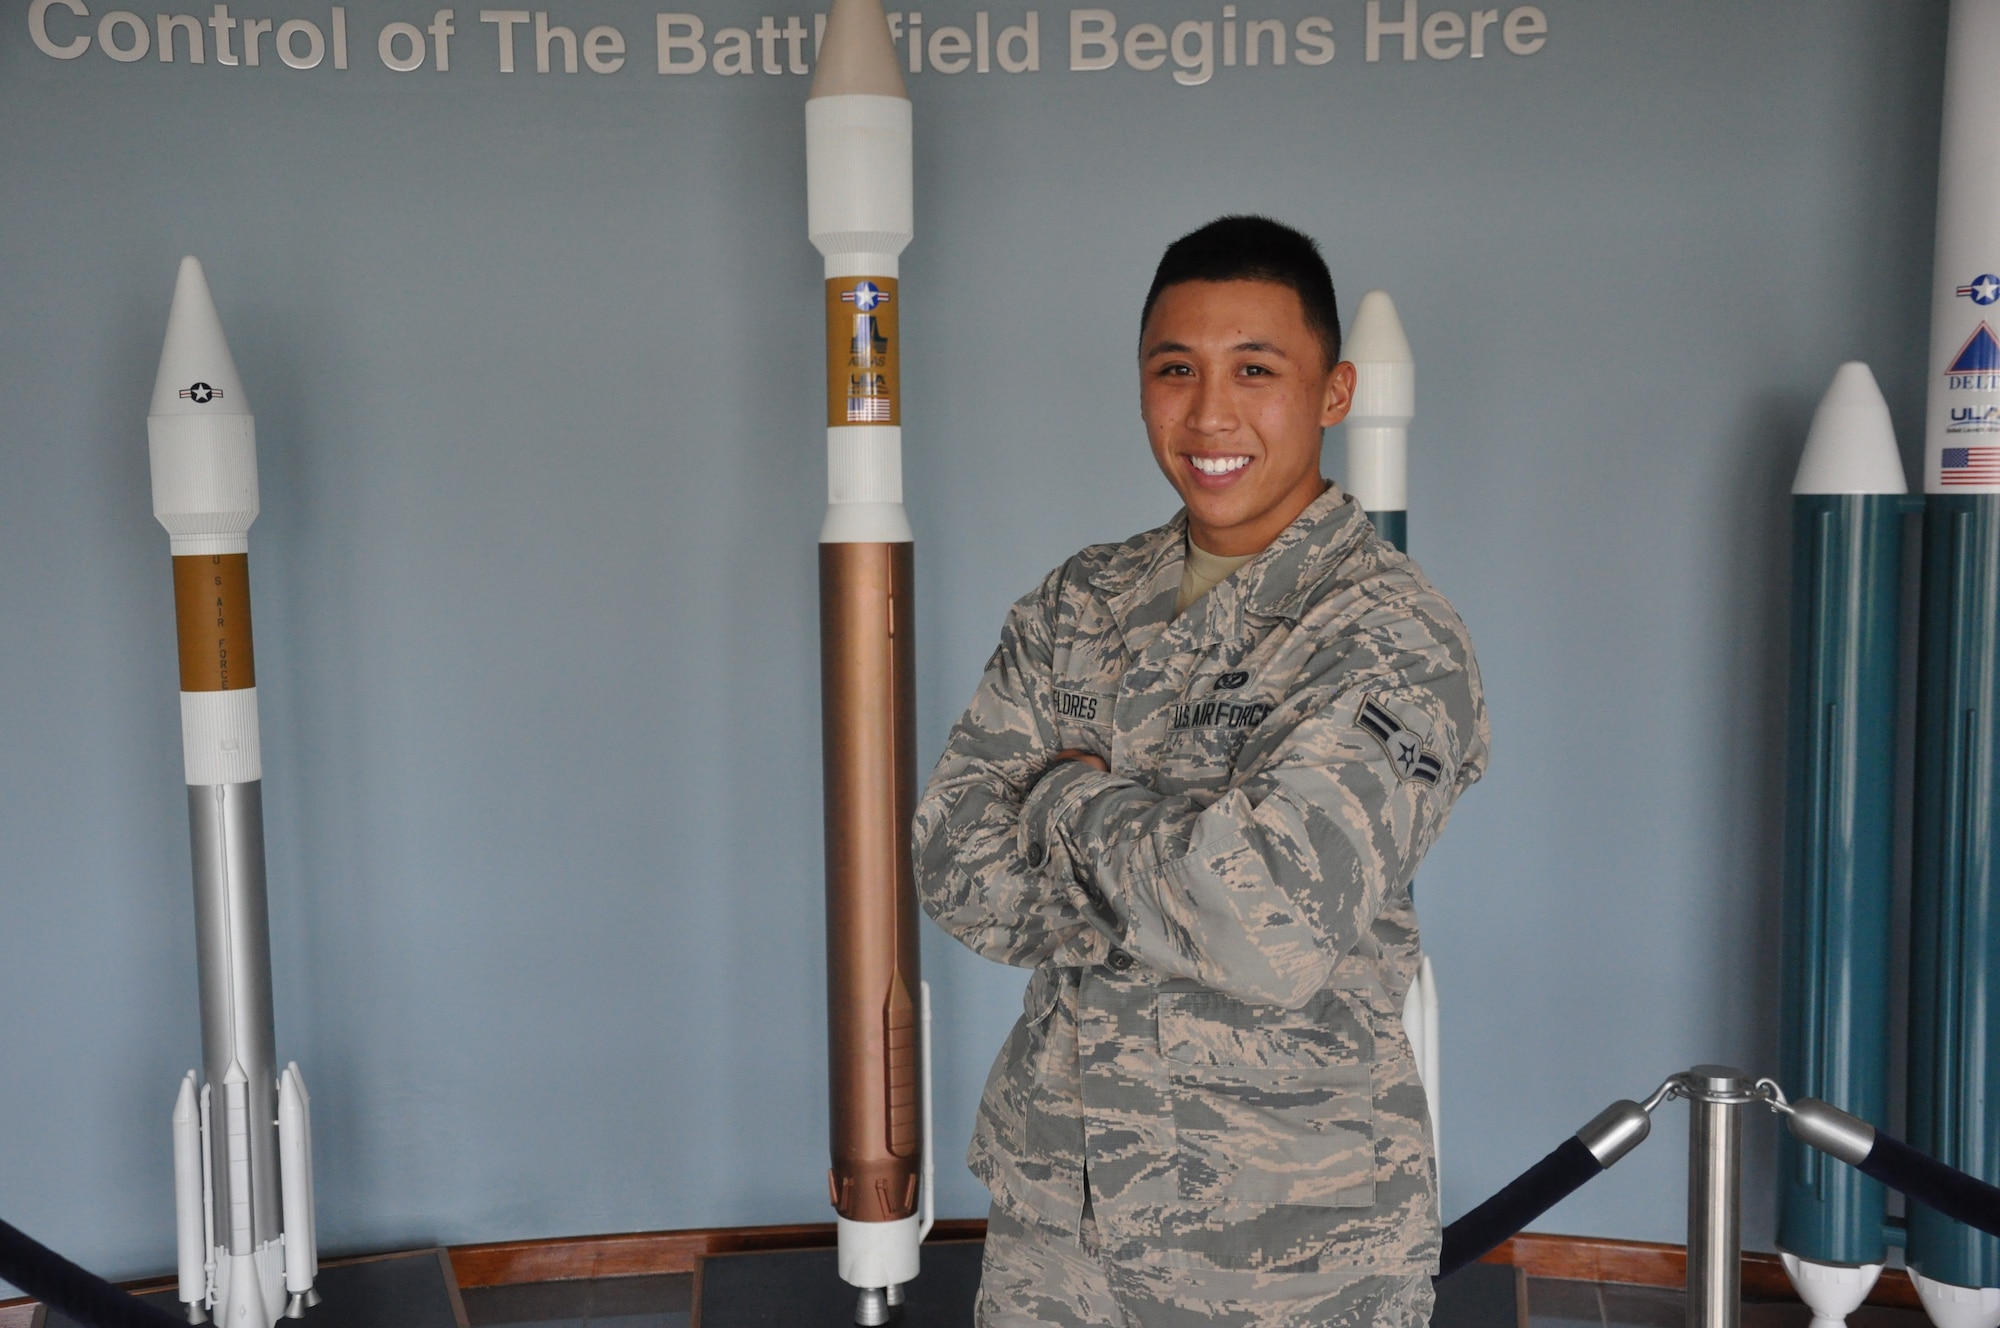 Airman 1st Class Jake Flores, 45th Space Wing Civil Engineer Squadron heating, ventilation, air conditioning and refrigeration technician, was recently selected for senior airman Below the Zone Sept. 25, 2015, at Patrick Air Force Base, Fla. BTZ is a competitive early promotion program offered to those in the rank of airman first class, who stand out from their peers and perform duties at a level above their current rank. (U.S. Air Force photo by 1st Lt. Alicia Premo/Released)